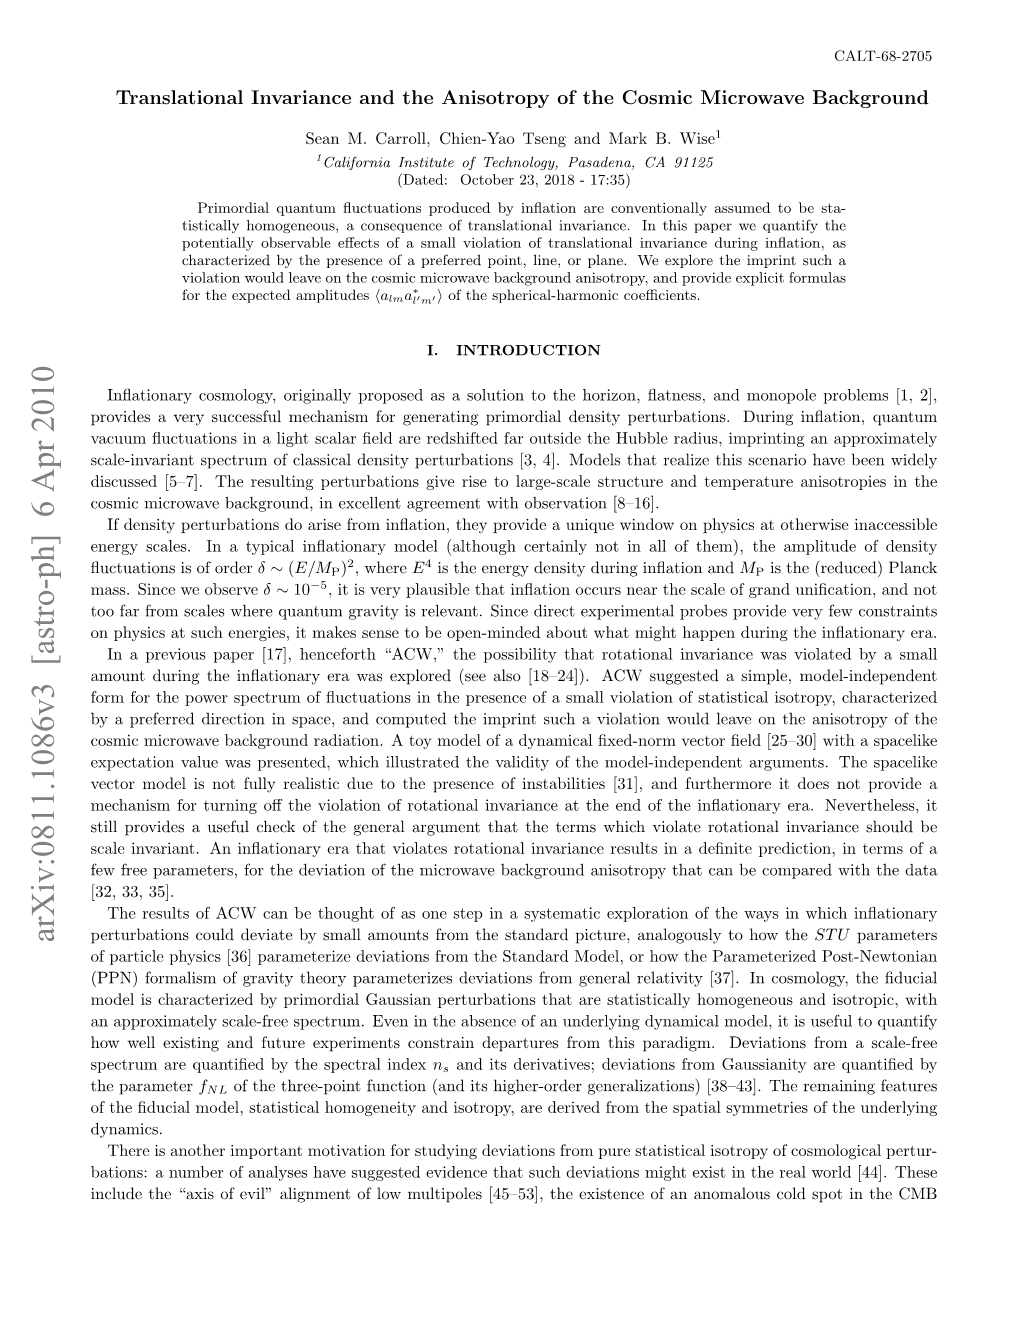 Translational Invariance and the Anisotropy of the Cosmic Microwave Background